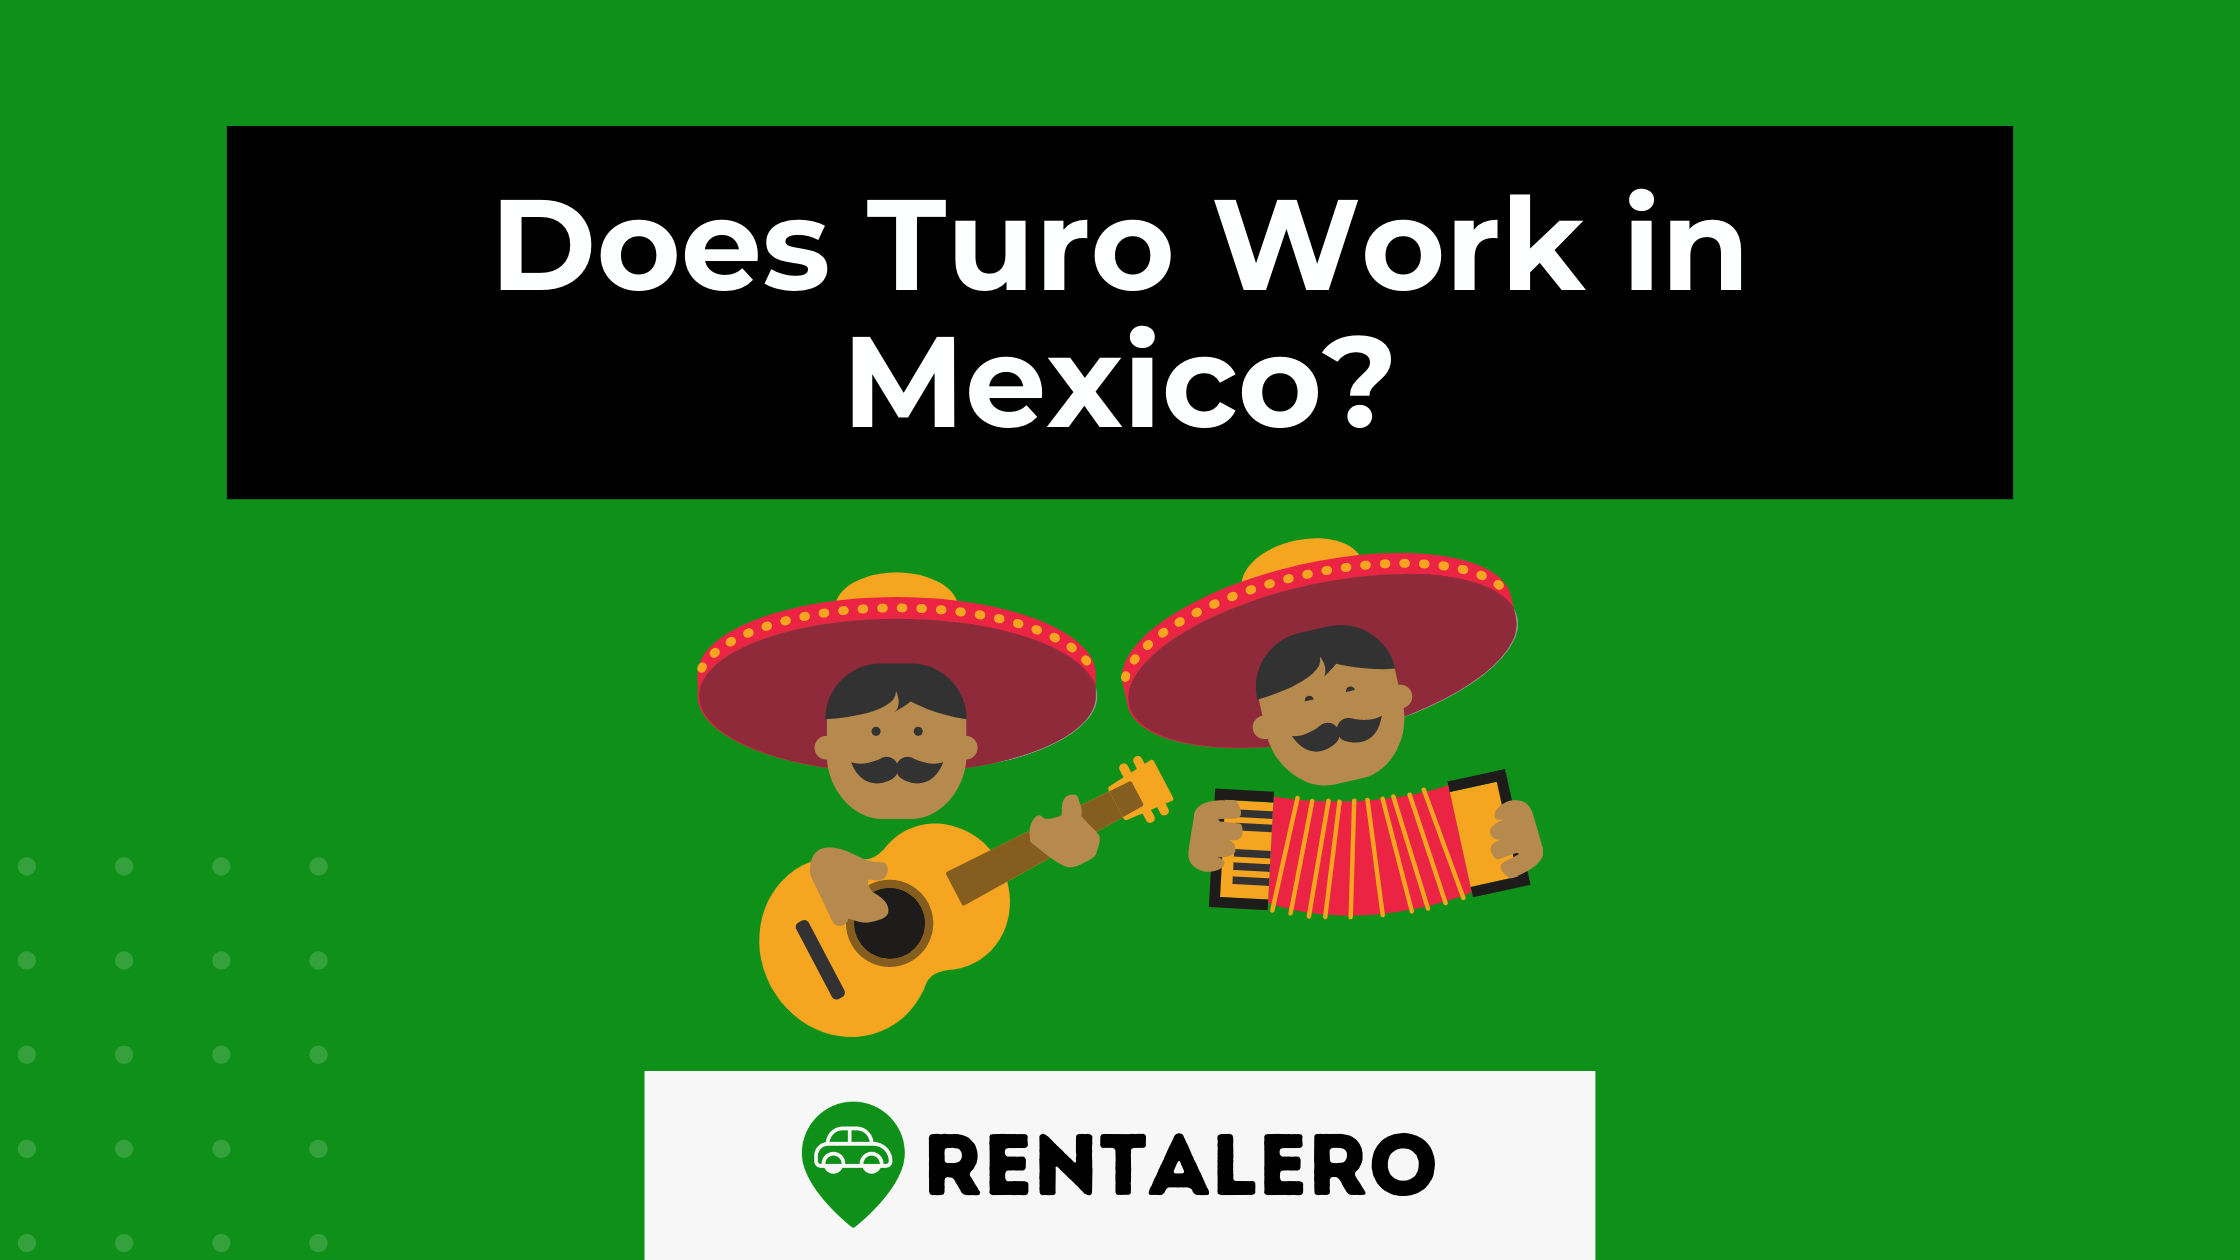 Driving into Mexico's Heart: Does Turo Work in Mexico?